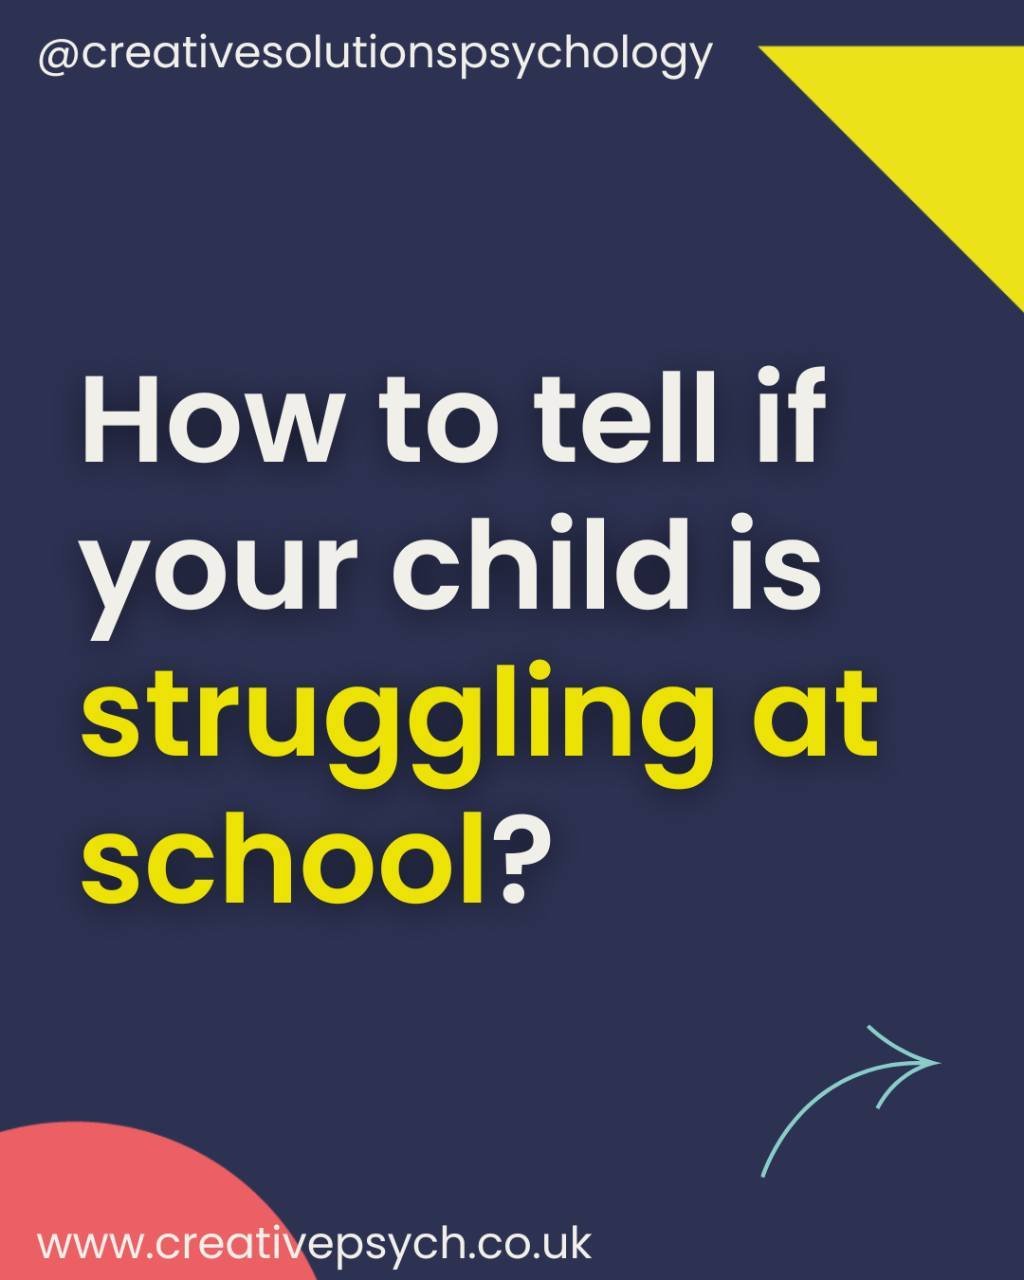 As a child and educational psychologist, I understand the importance of early identification of struggles in school. It's vital for parents to recognise the signs so they can intervene early and provide the necessary support. 

Recognising and addres